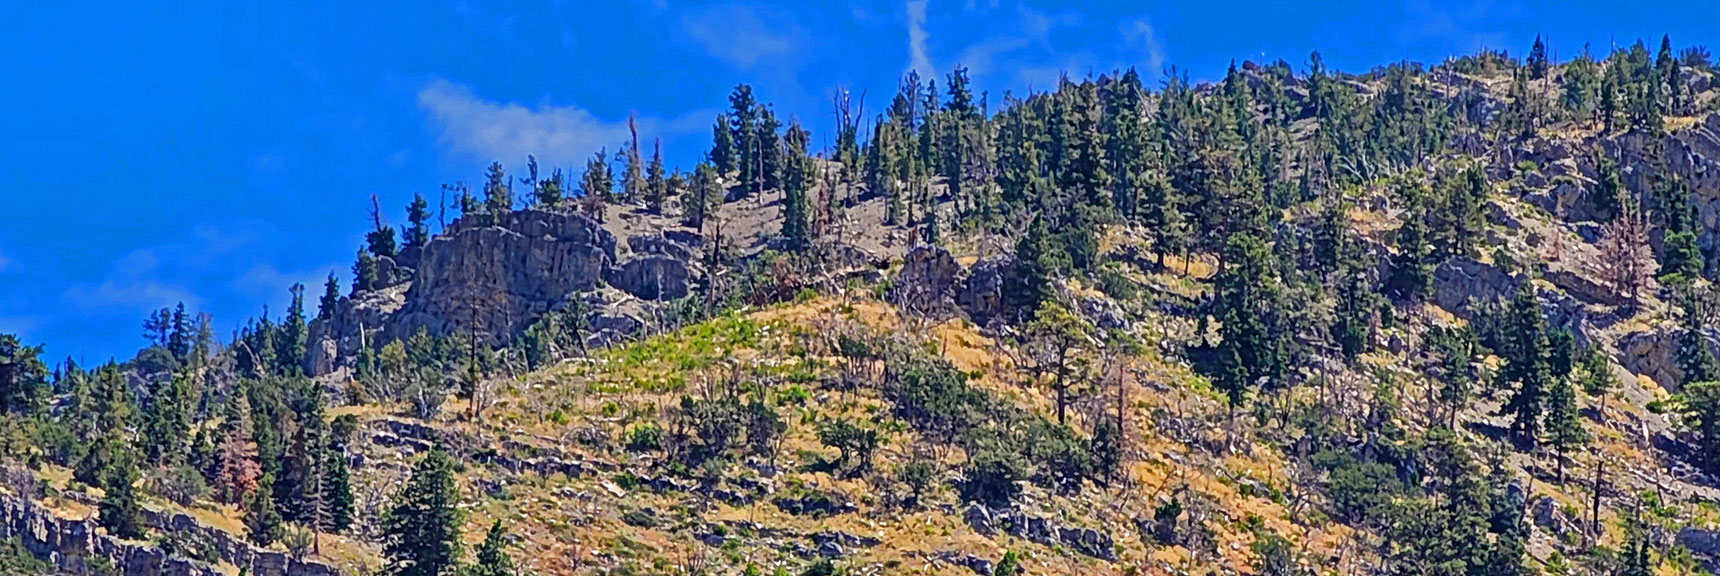 Closer View of Lower Access Point to Short Eastern Approach Ridge | Harris Mountain Triangle | Mt Charleston Wilderness, Nevada